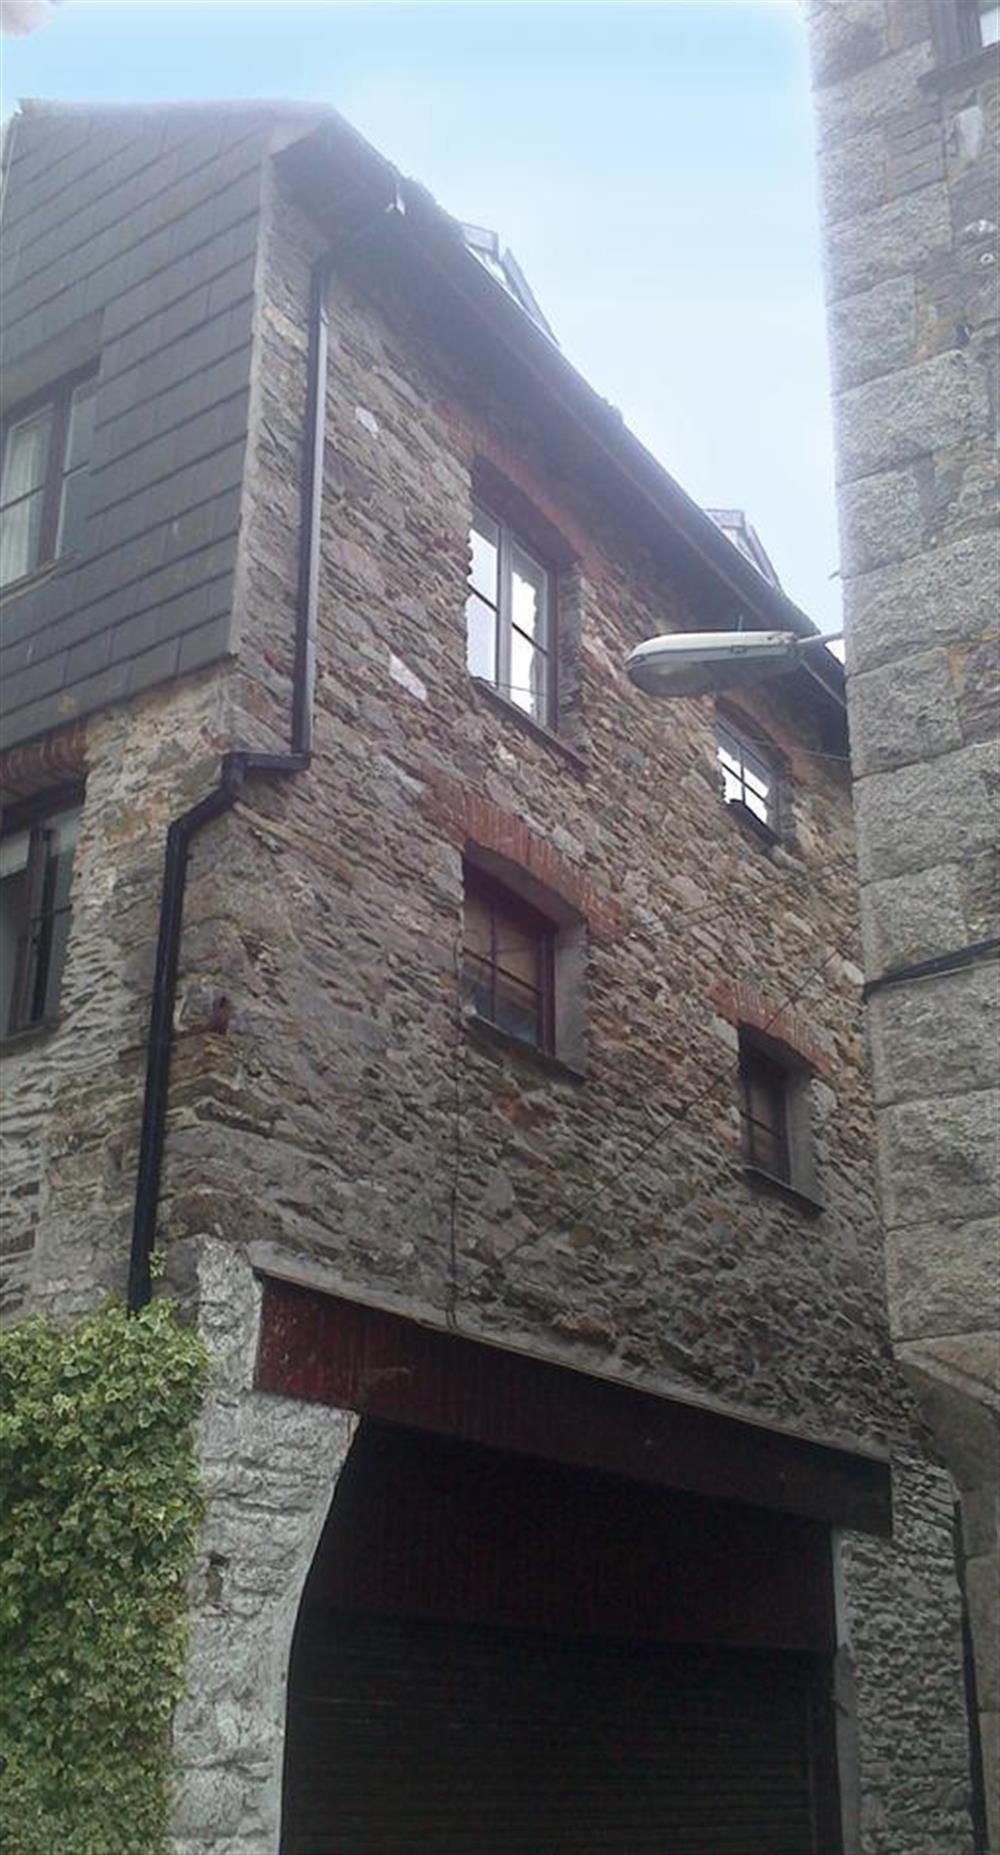 The exterior of Buller House at Apartment 1, Buller House, Looe